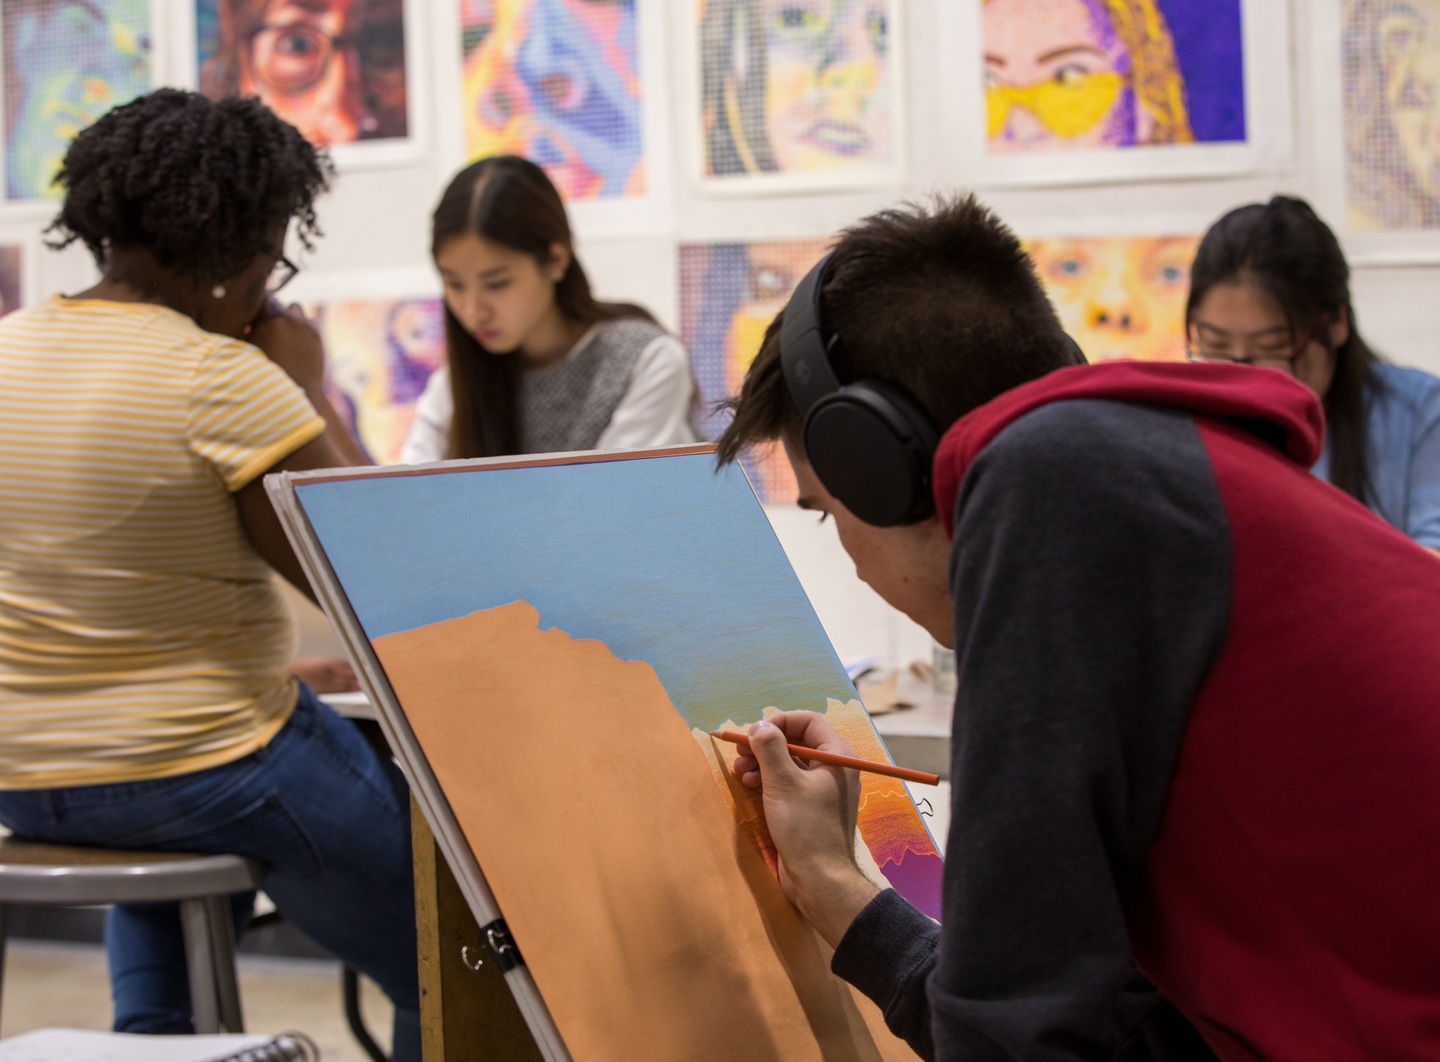 Person in headphones bends over a painting of a desert landscape. Several other people work in the background. The wall is hung with colorful portrait drawings.